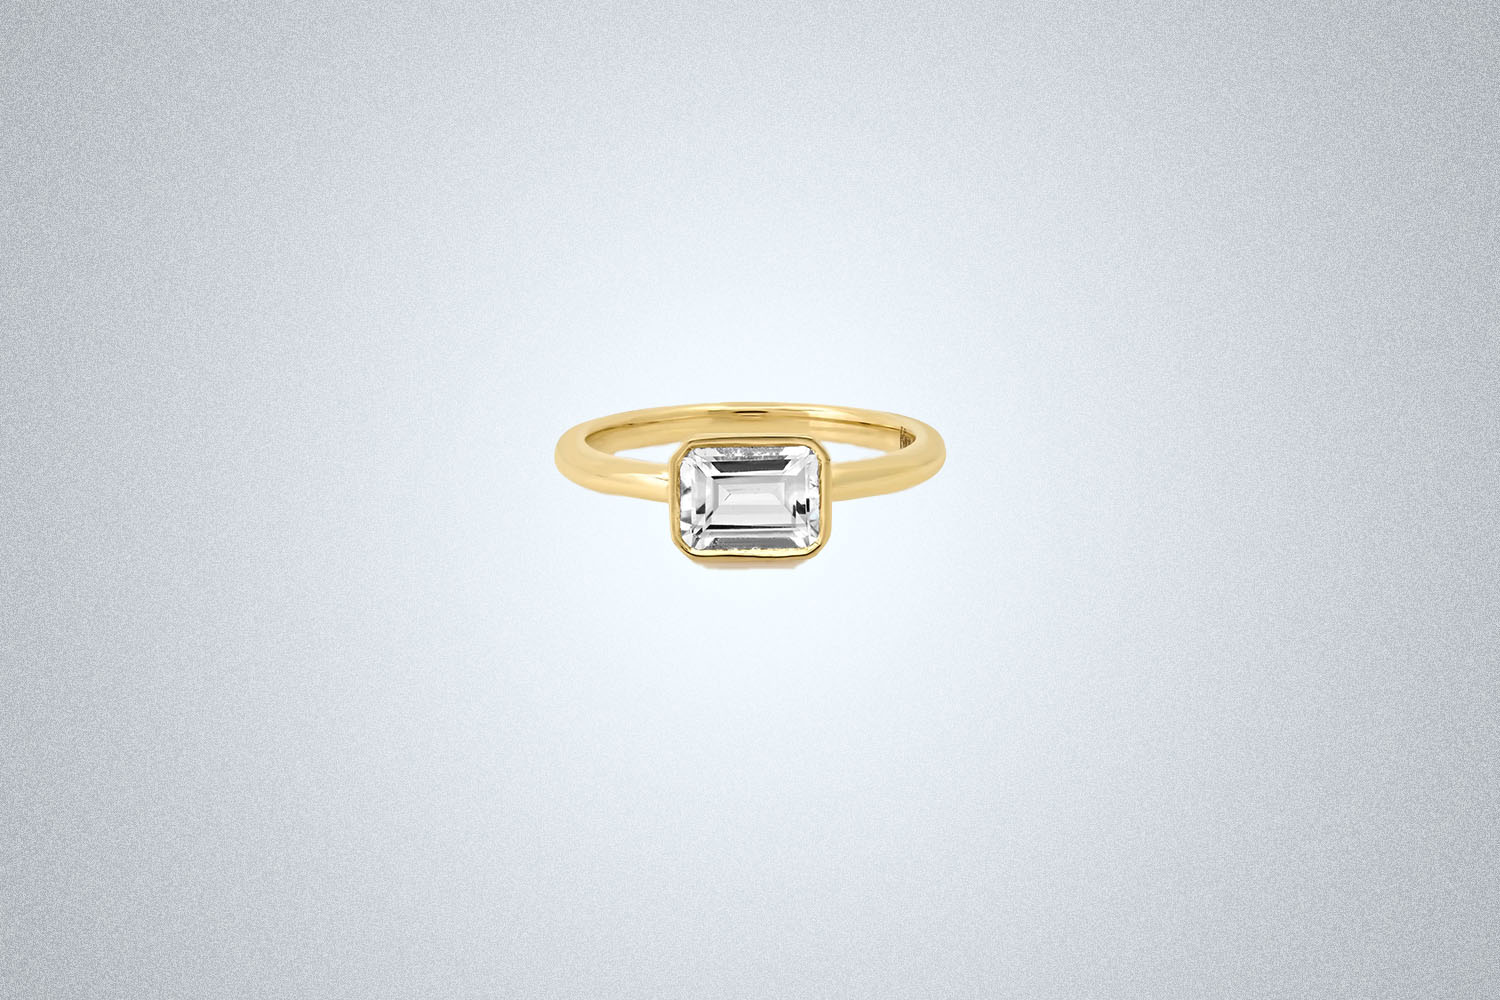 A Kinn The Sophia Engagement Ring on a gray background